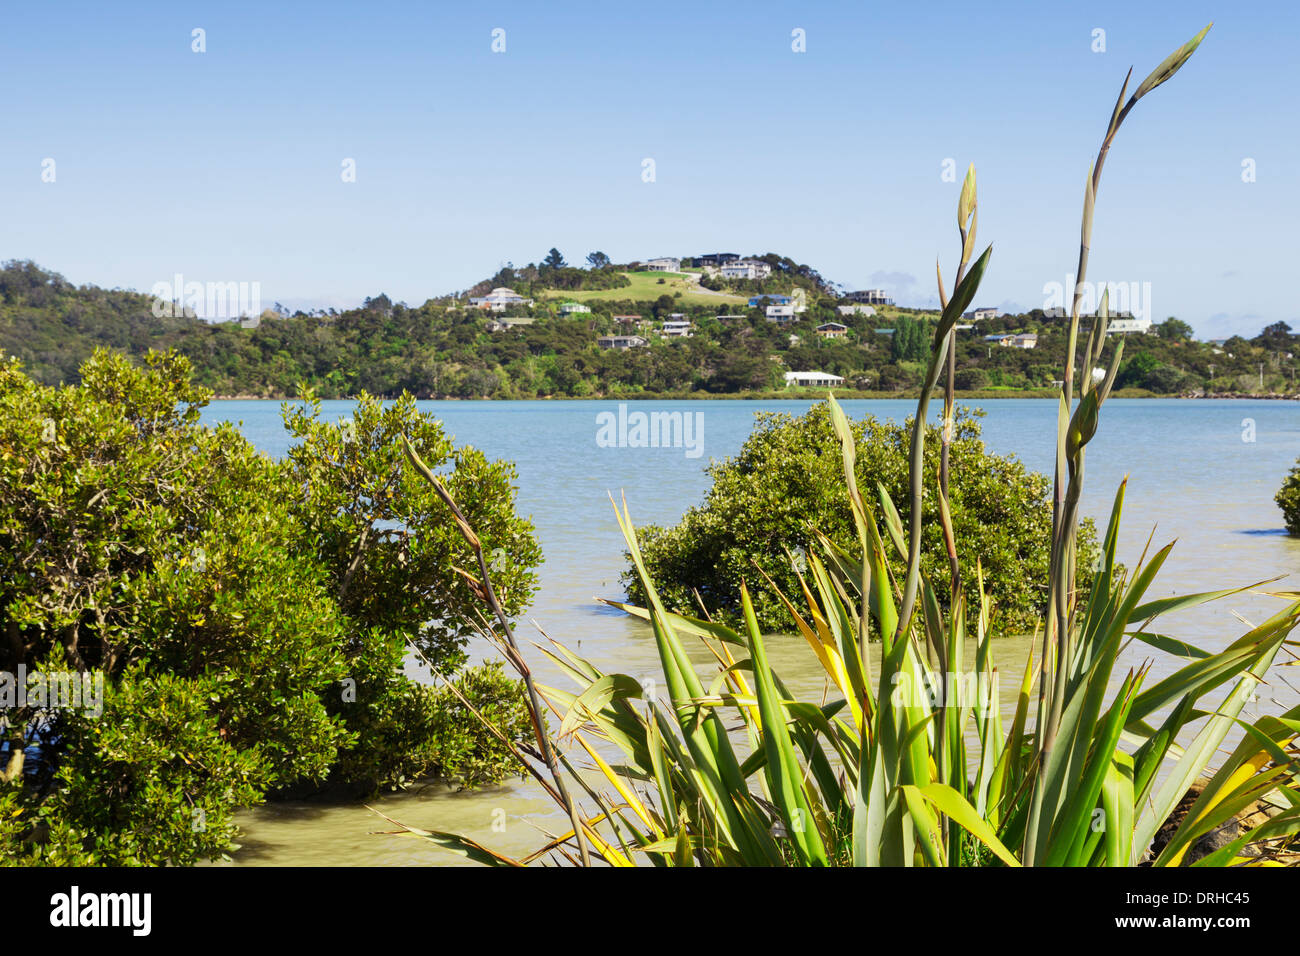 A view over New Zealand native flax and New Zealand mangrove to the town of Coromandel in the Coromandel Peninsula, New Zealand. Stock Photo